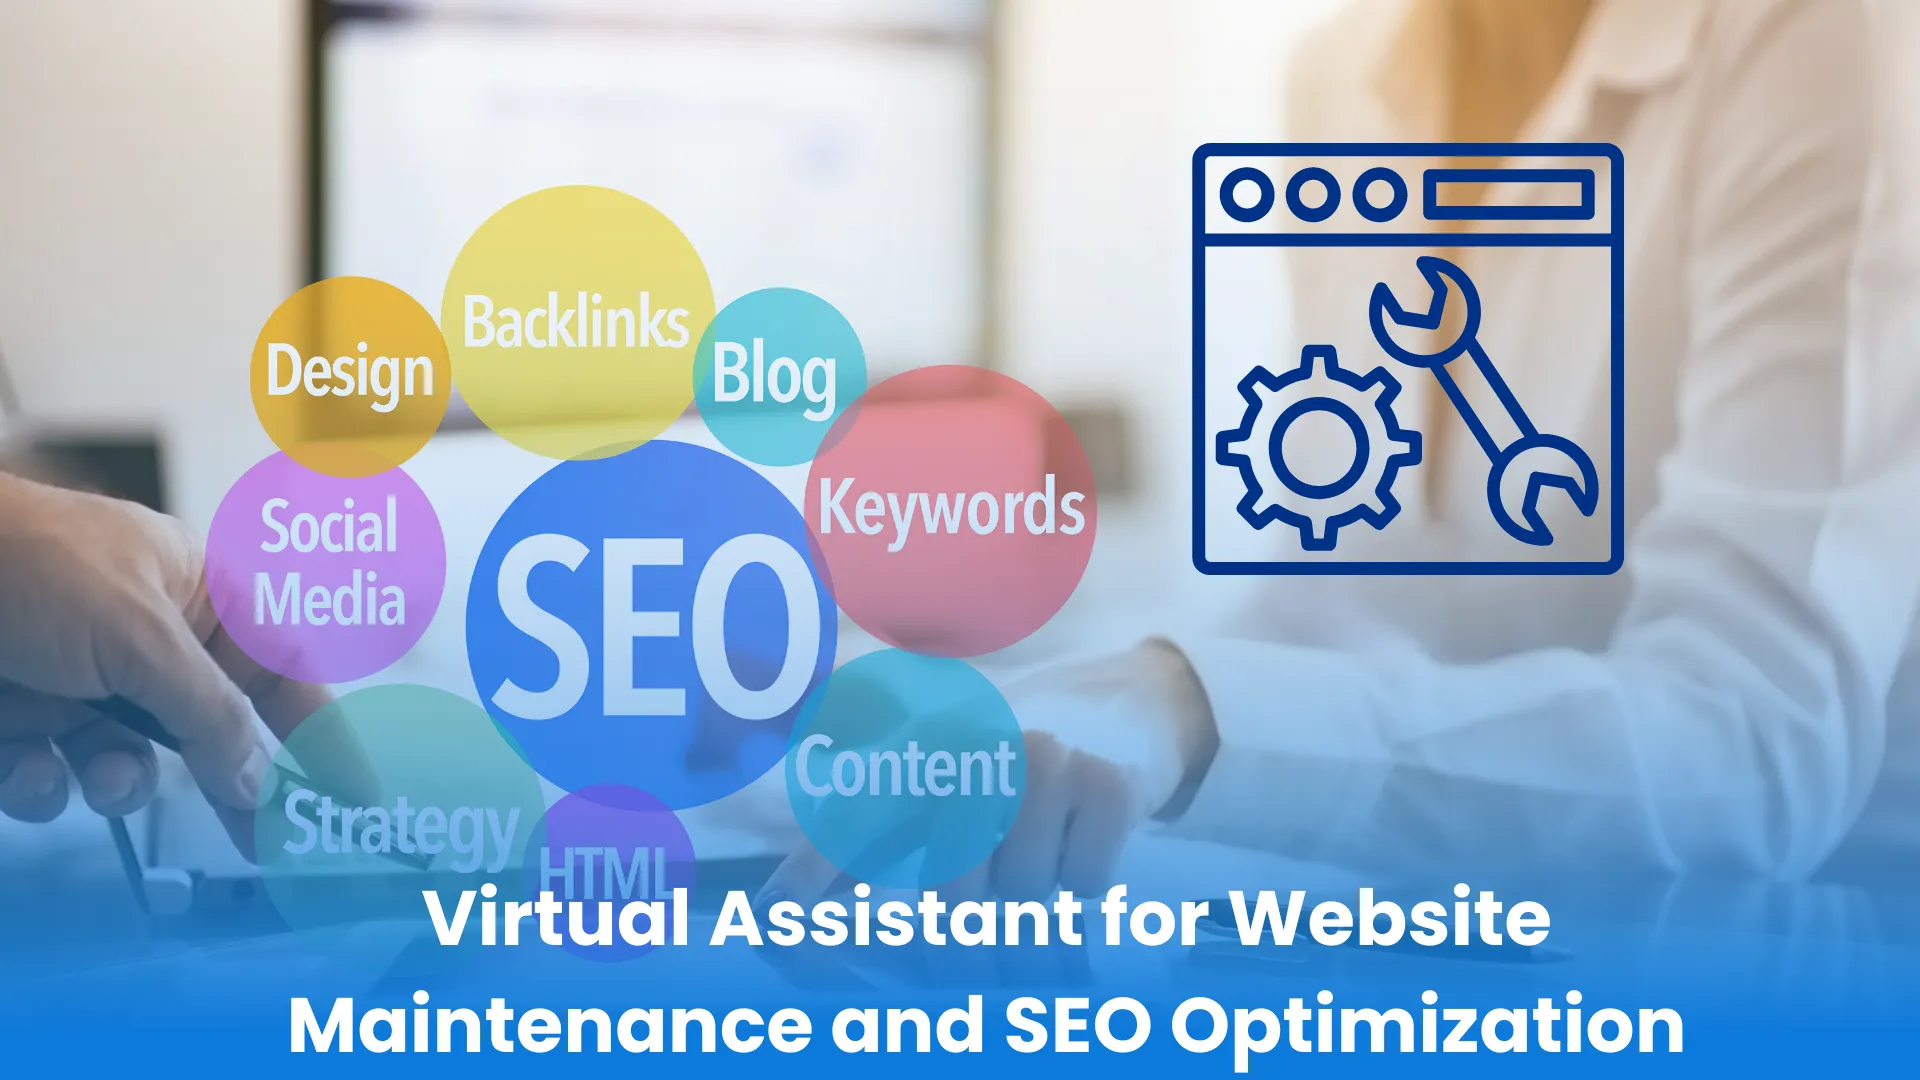 Virtual Assistant for Website Maintenance and SEO Optimization